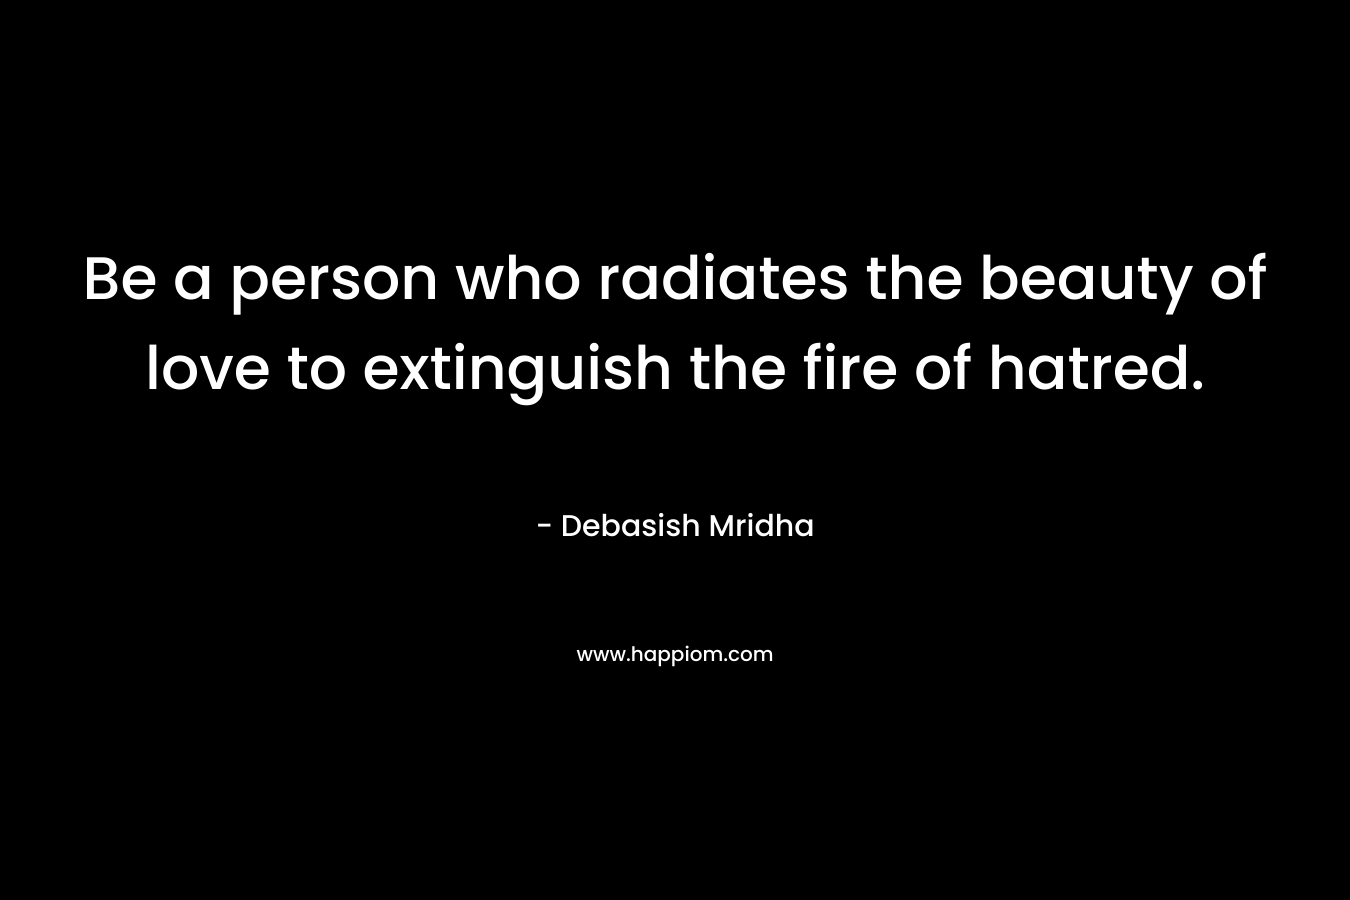 Be a person who radiates the beauty of love to extinguish the fire of hatred.